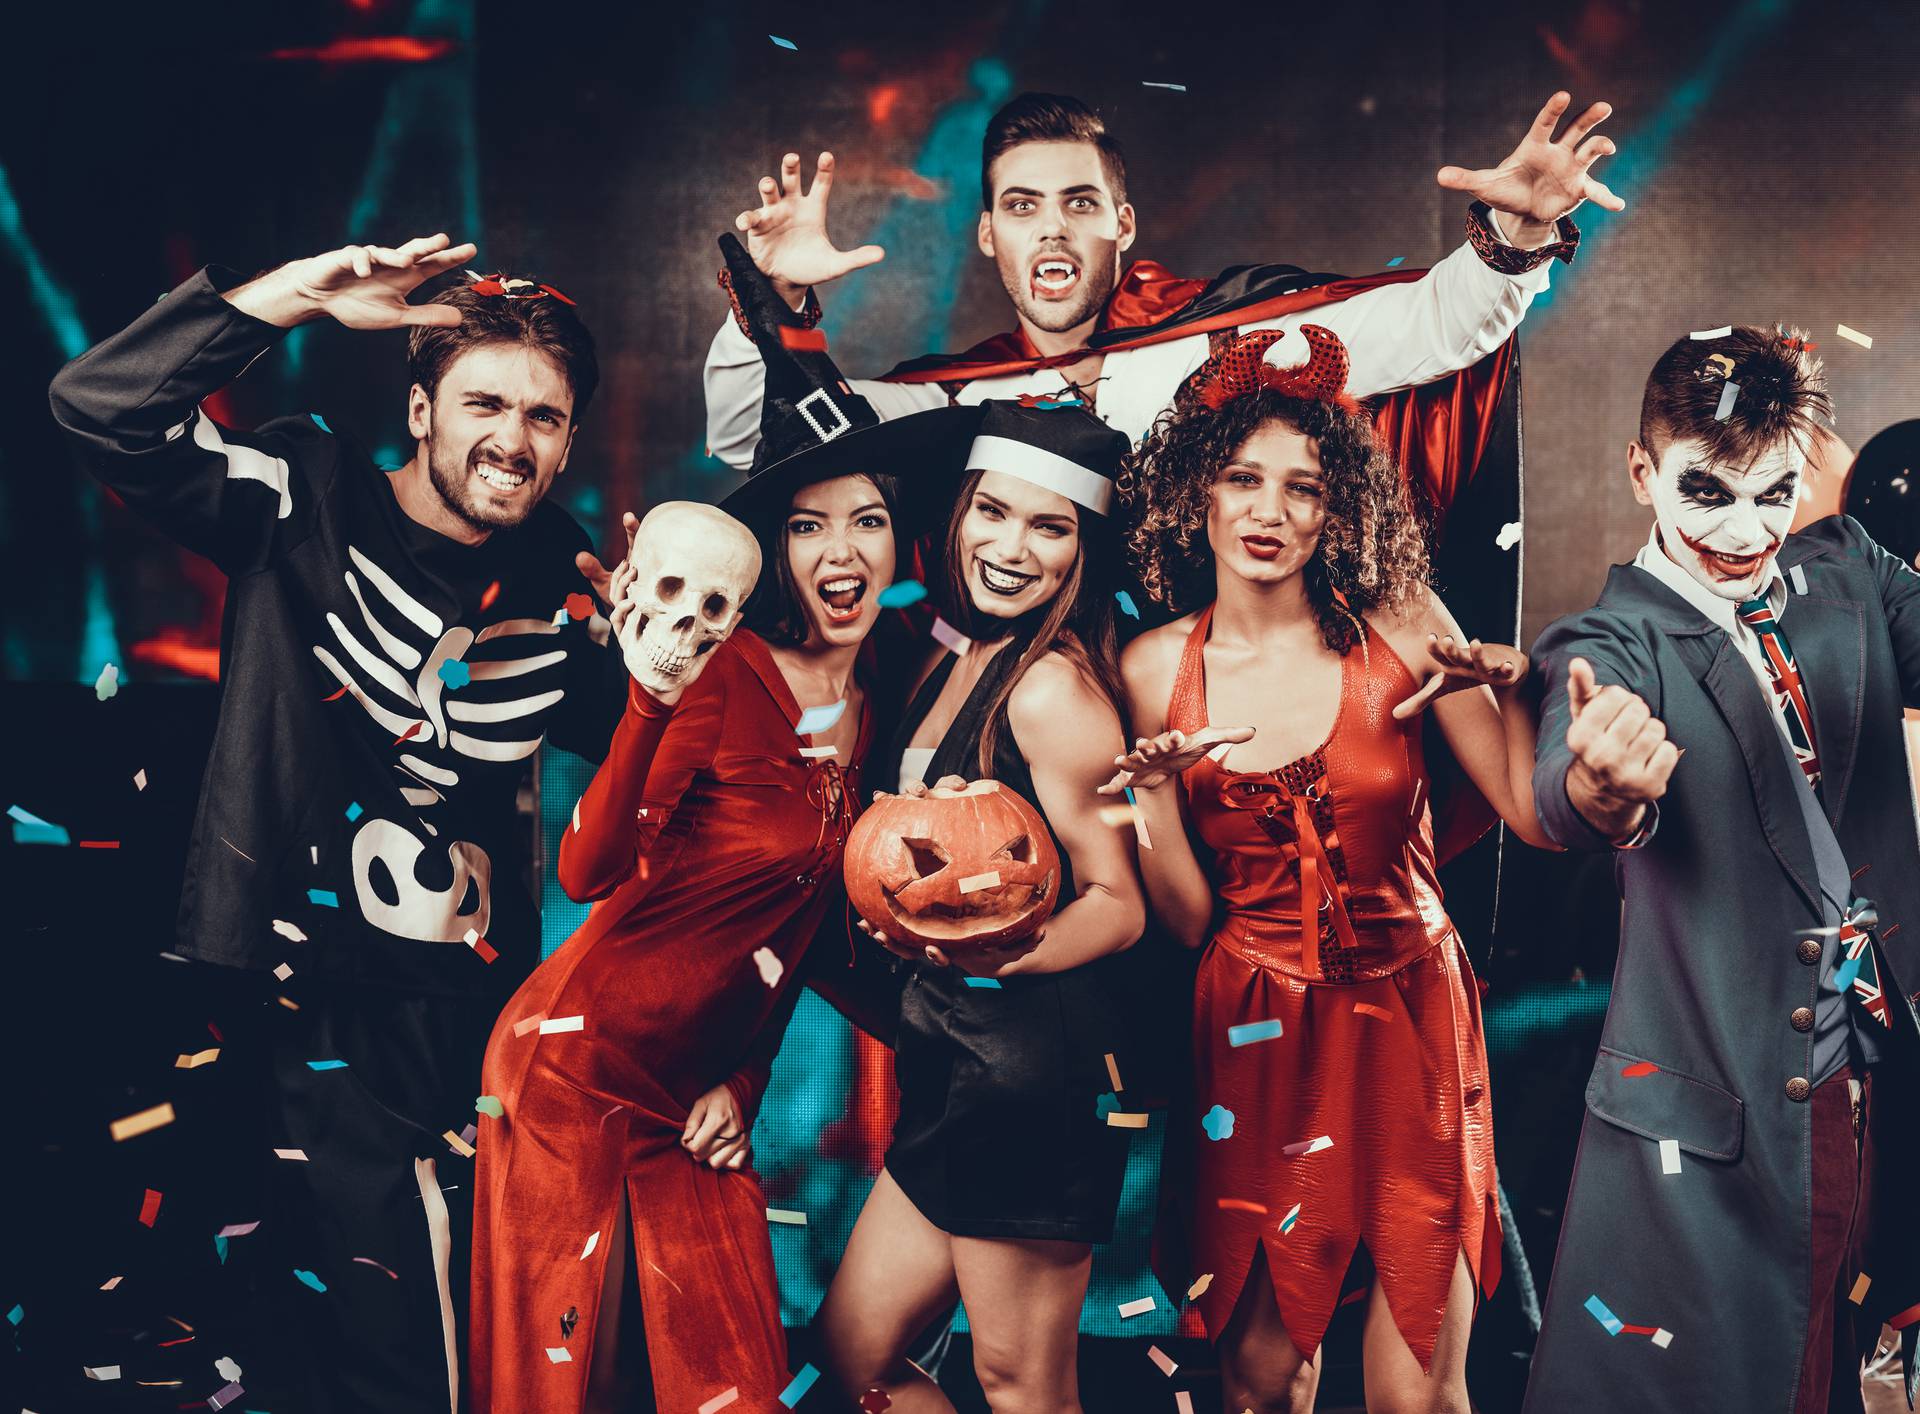 Portrait of Young Smiling People in Scary Costumes